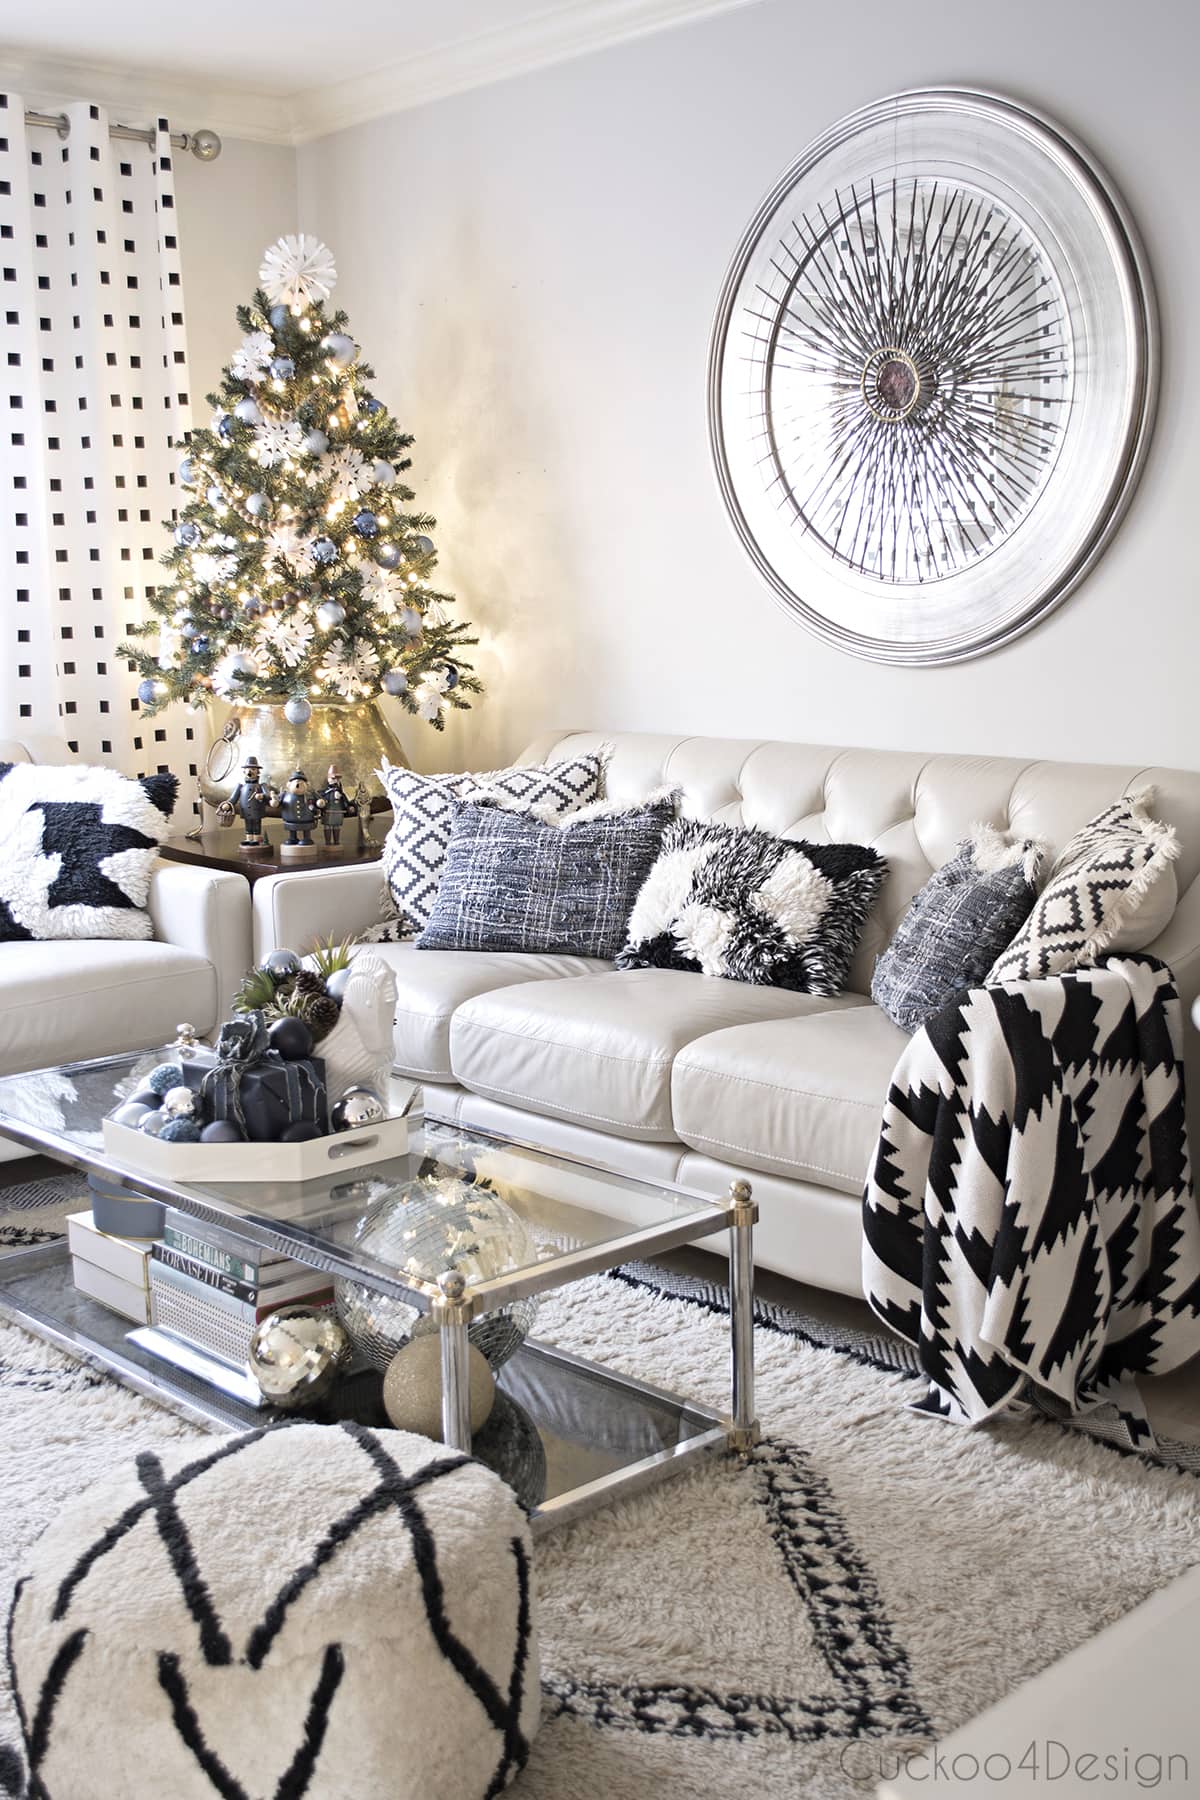 neutral living room with Blue, black and white eclectic accessories